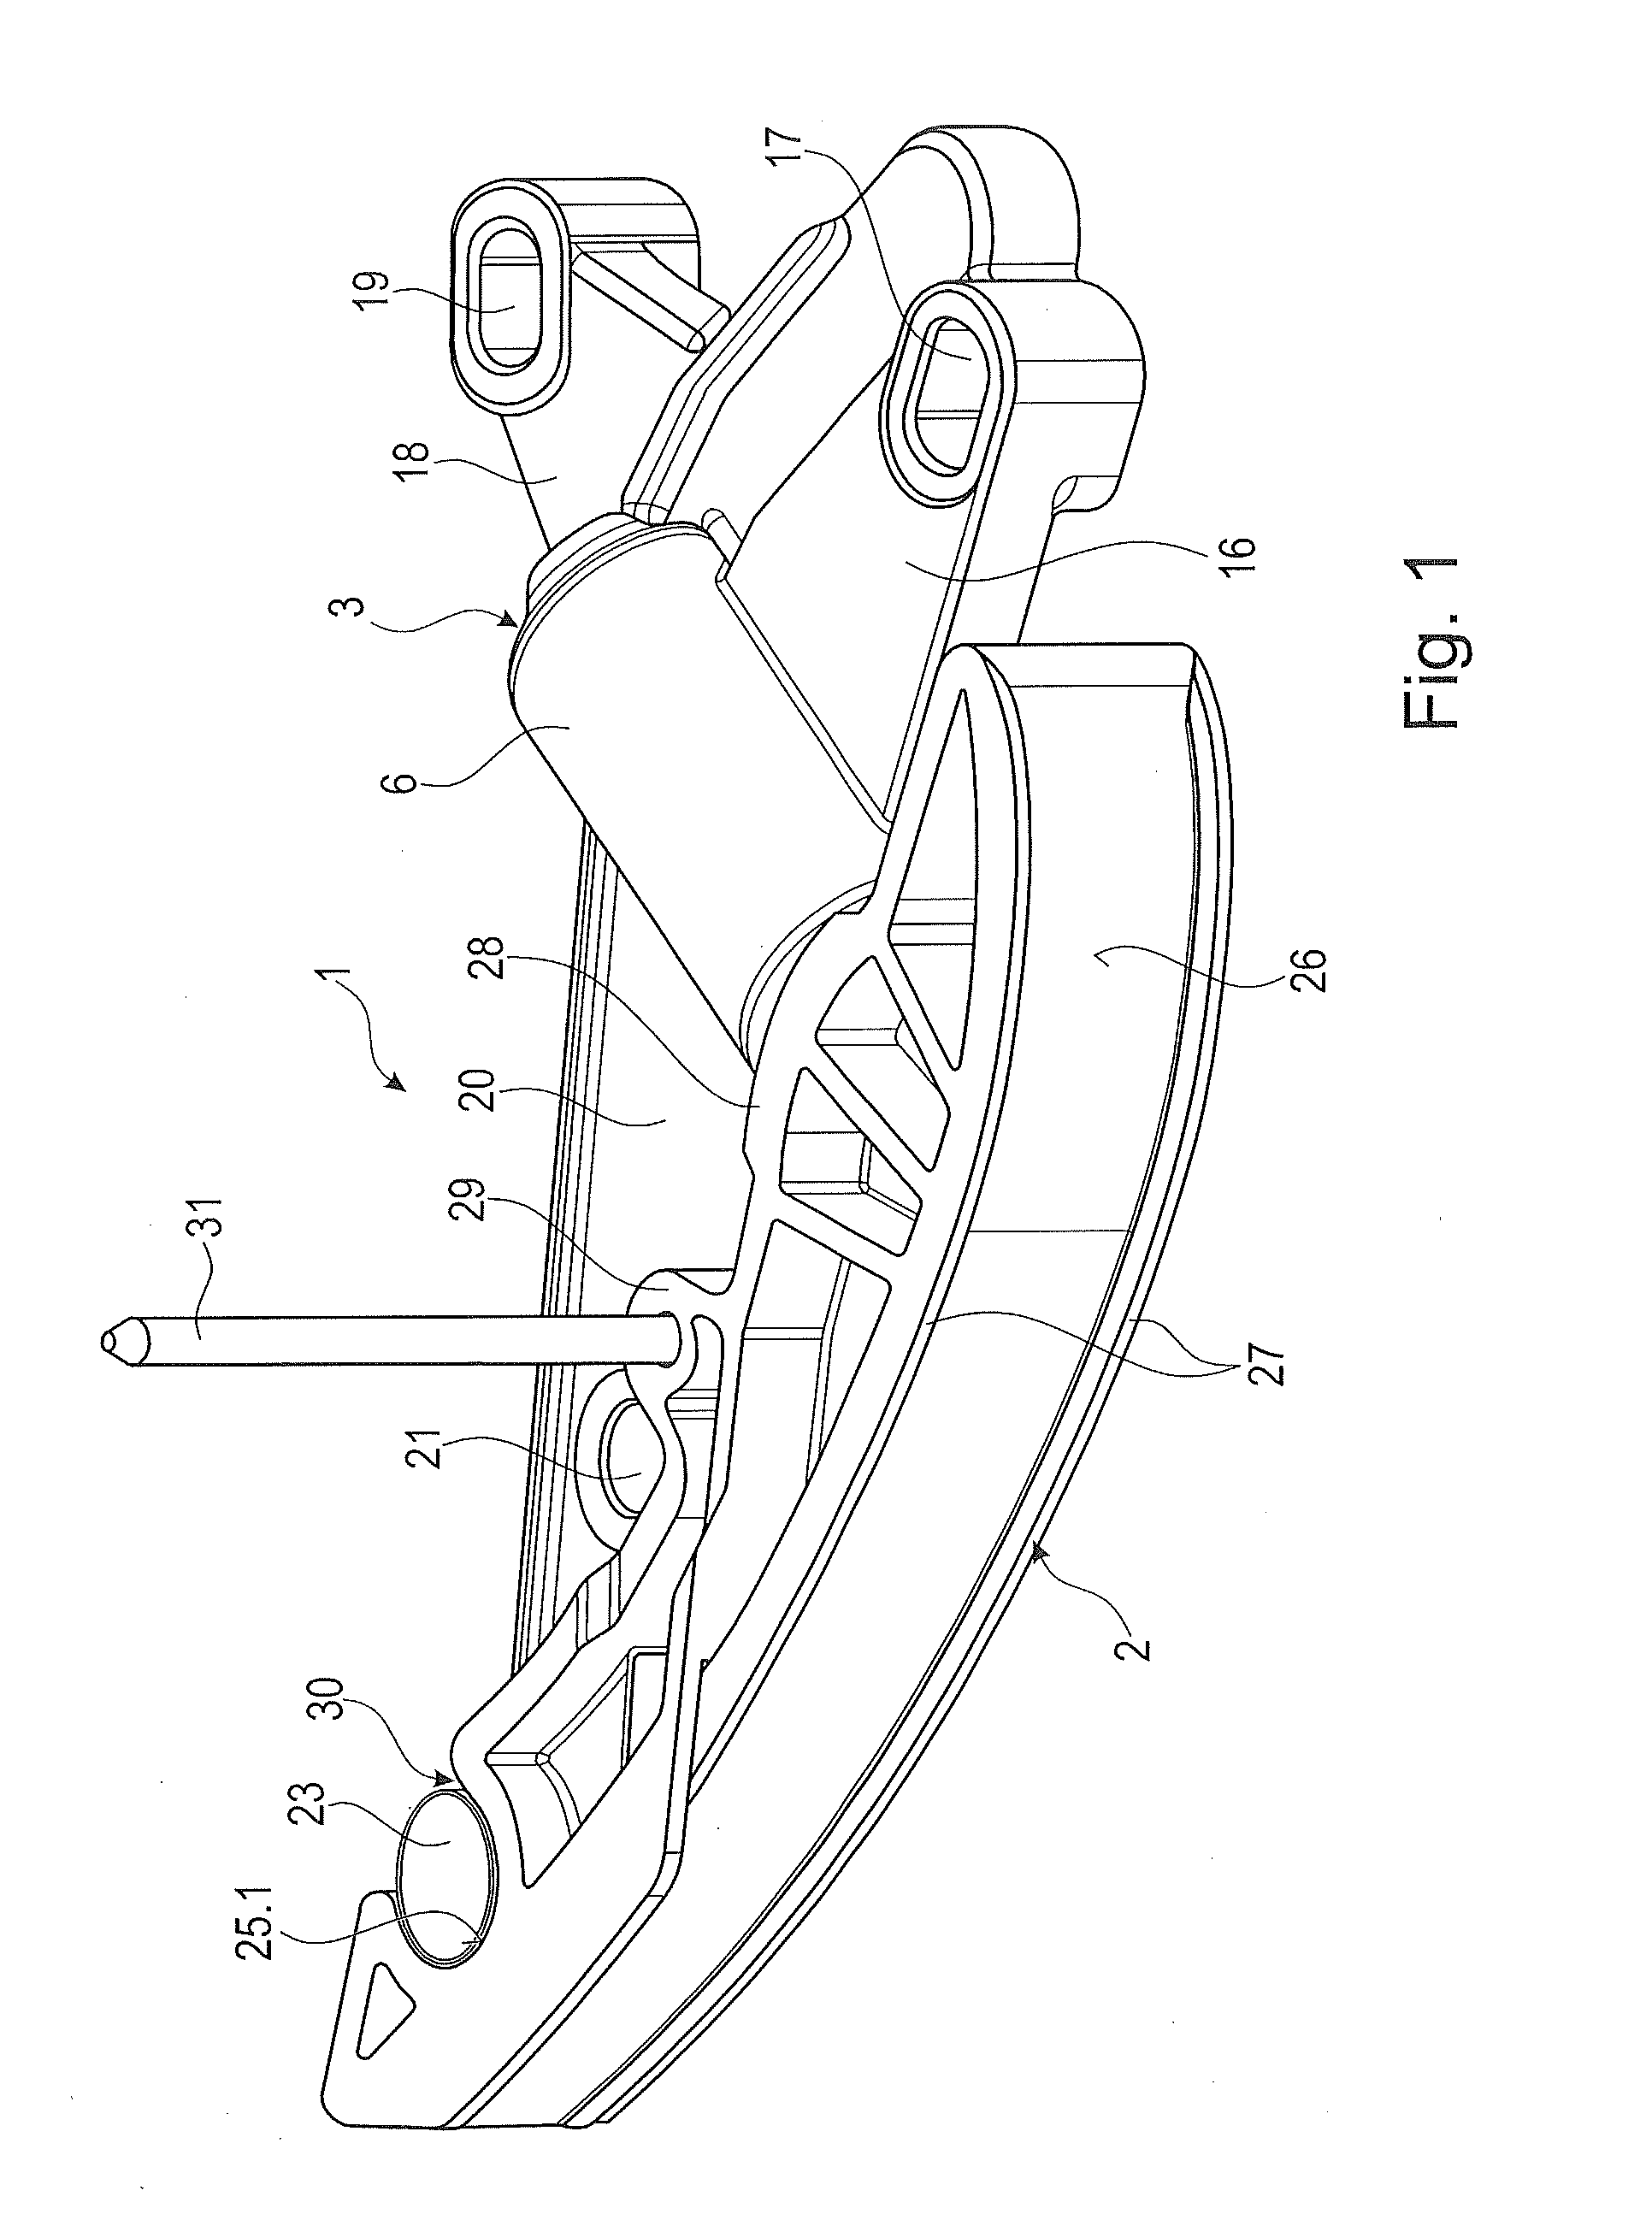 Tensioning rail with bayonet catch